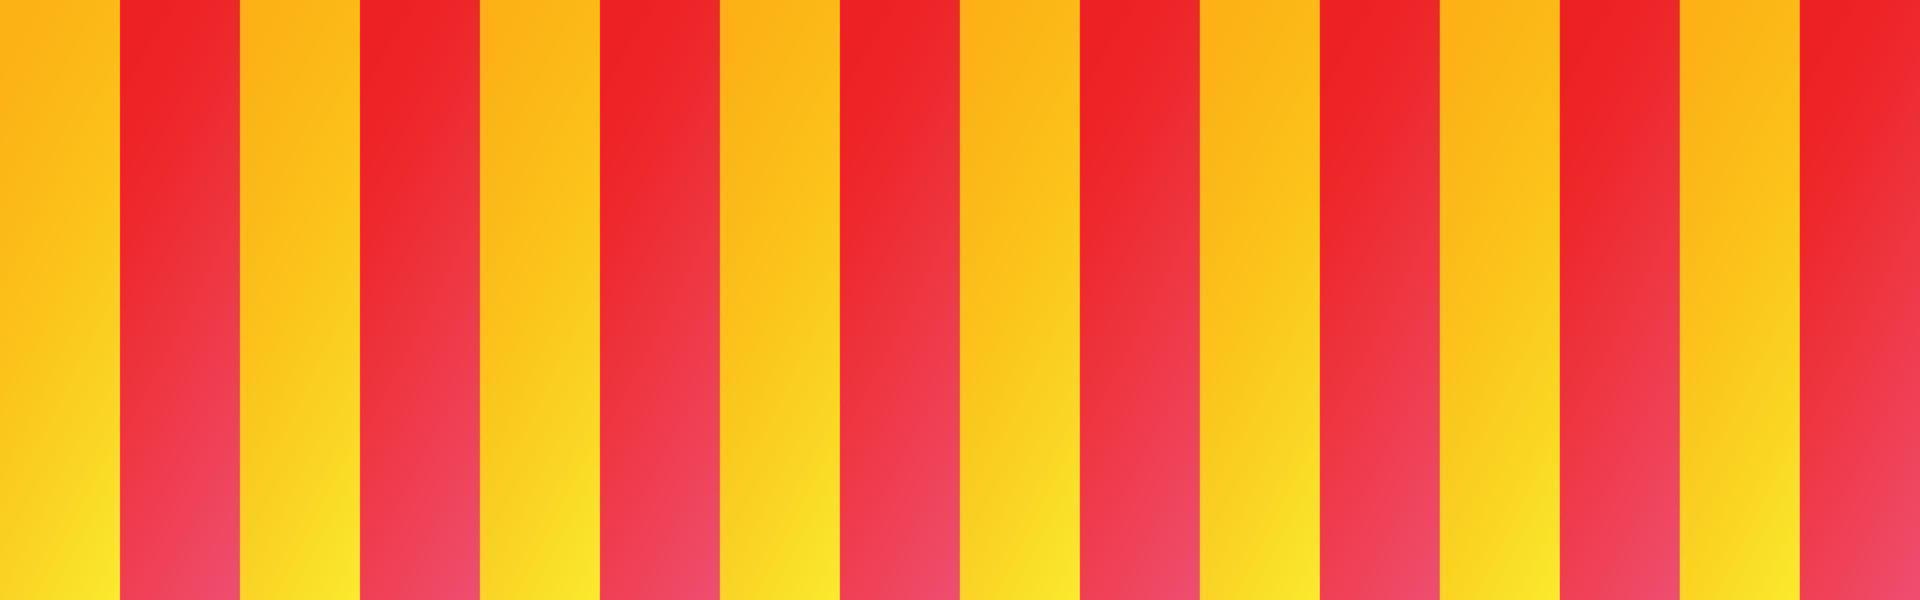 Vertical stripes red and yellow seamless vector pattern. Striped pattern. Horizontal lines. Horizontal stripes. Great for fabric